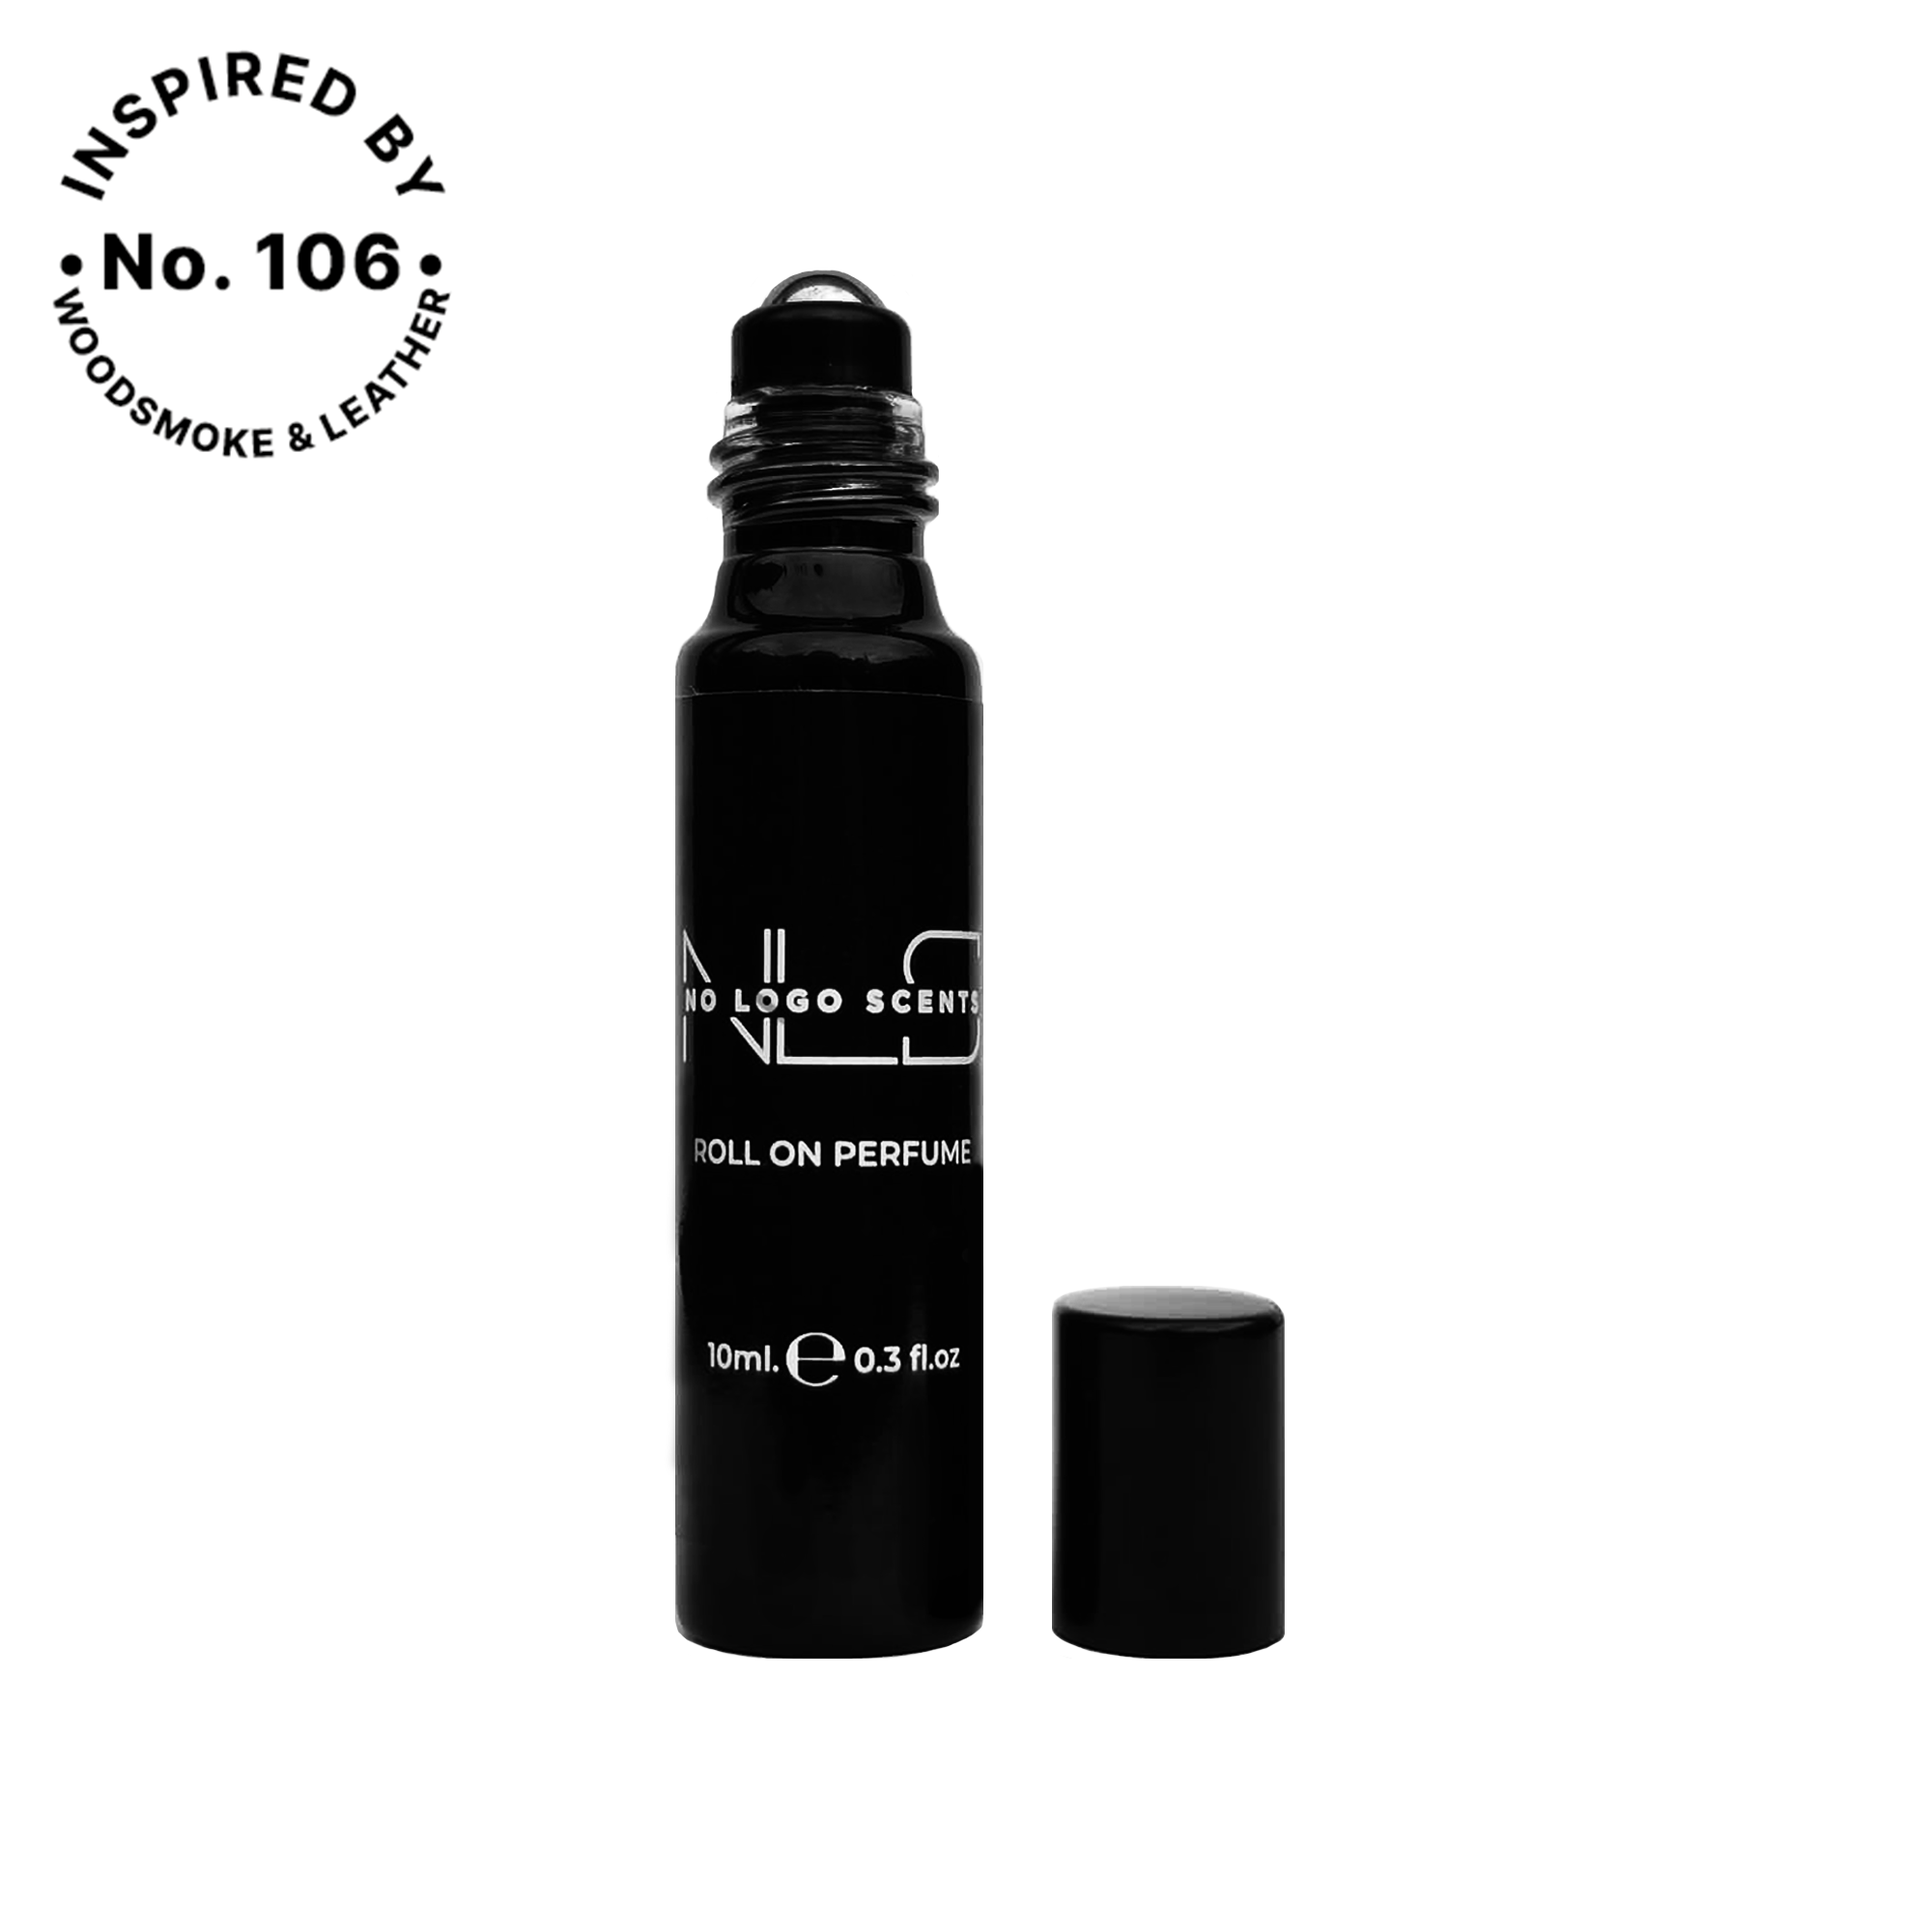 No.106 – INSPIRED BY WOODSMOKE & LEATHER from category UNISEX ROLL ON PERFUMES - 1